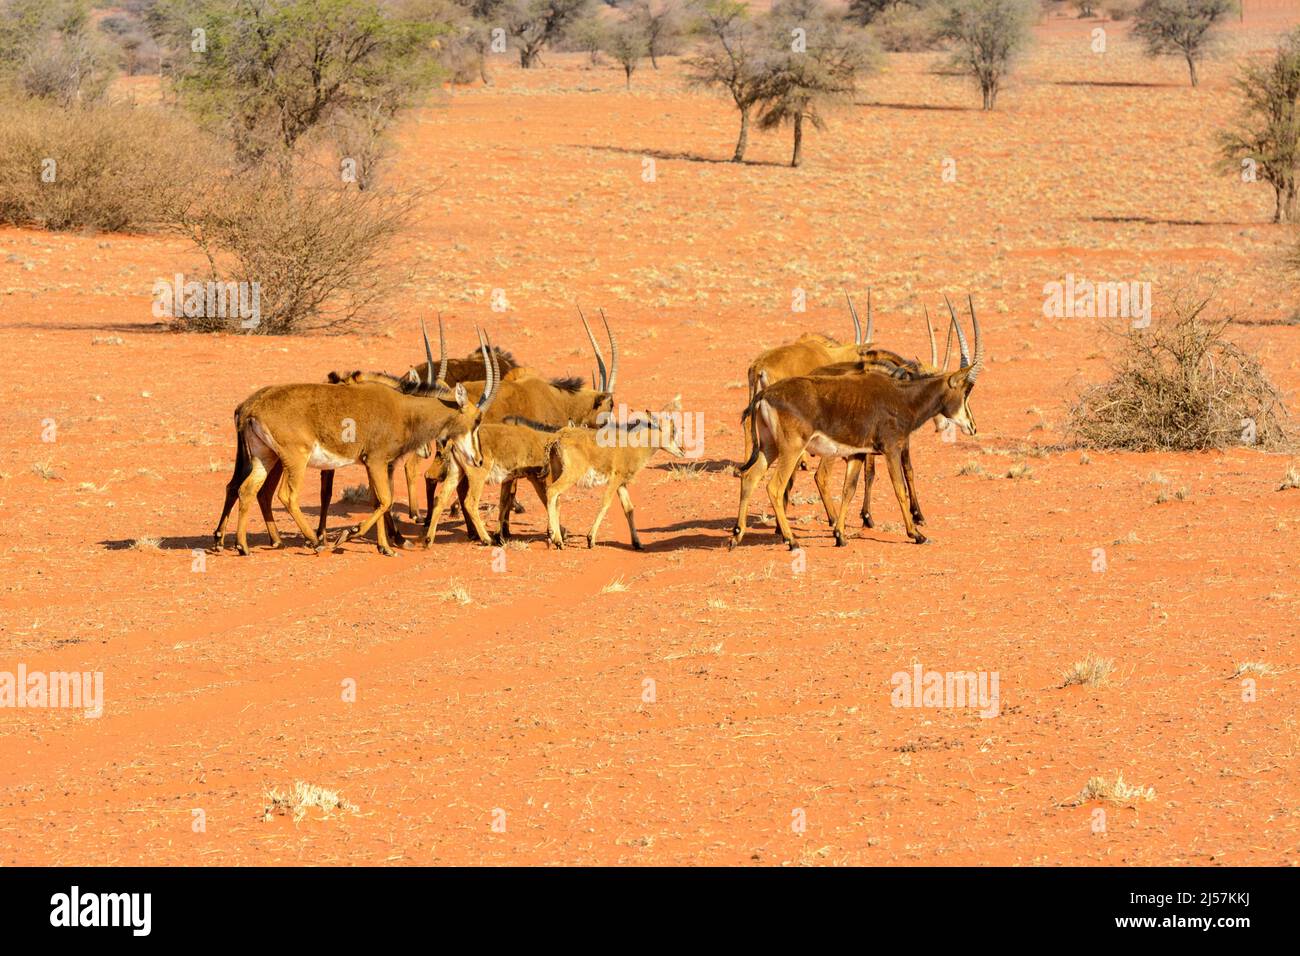 A matriarchal herd of southern sable antelopes (Hippotragus niger niger) walking across the red sand dunes of the Kalahari Desert, Namibia, Africa Stock Photo